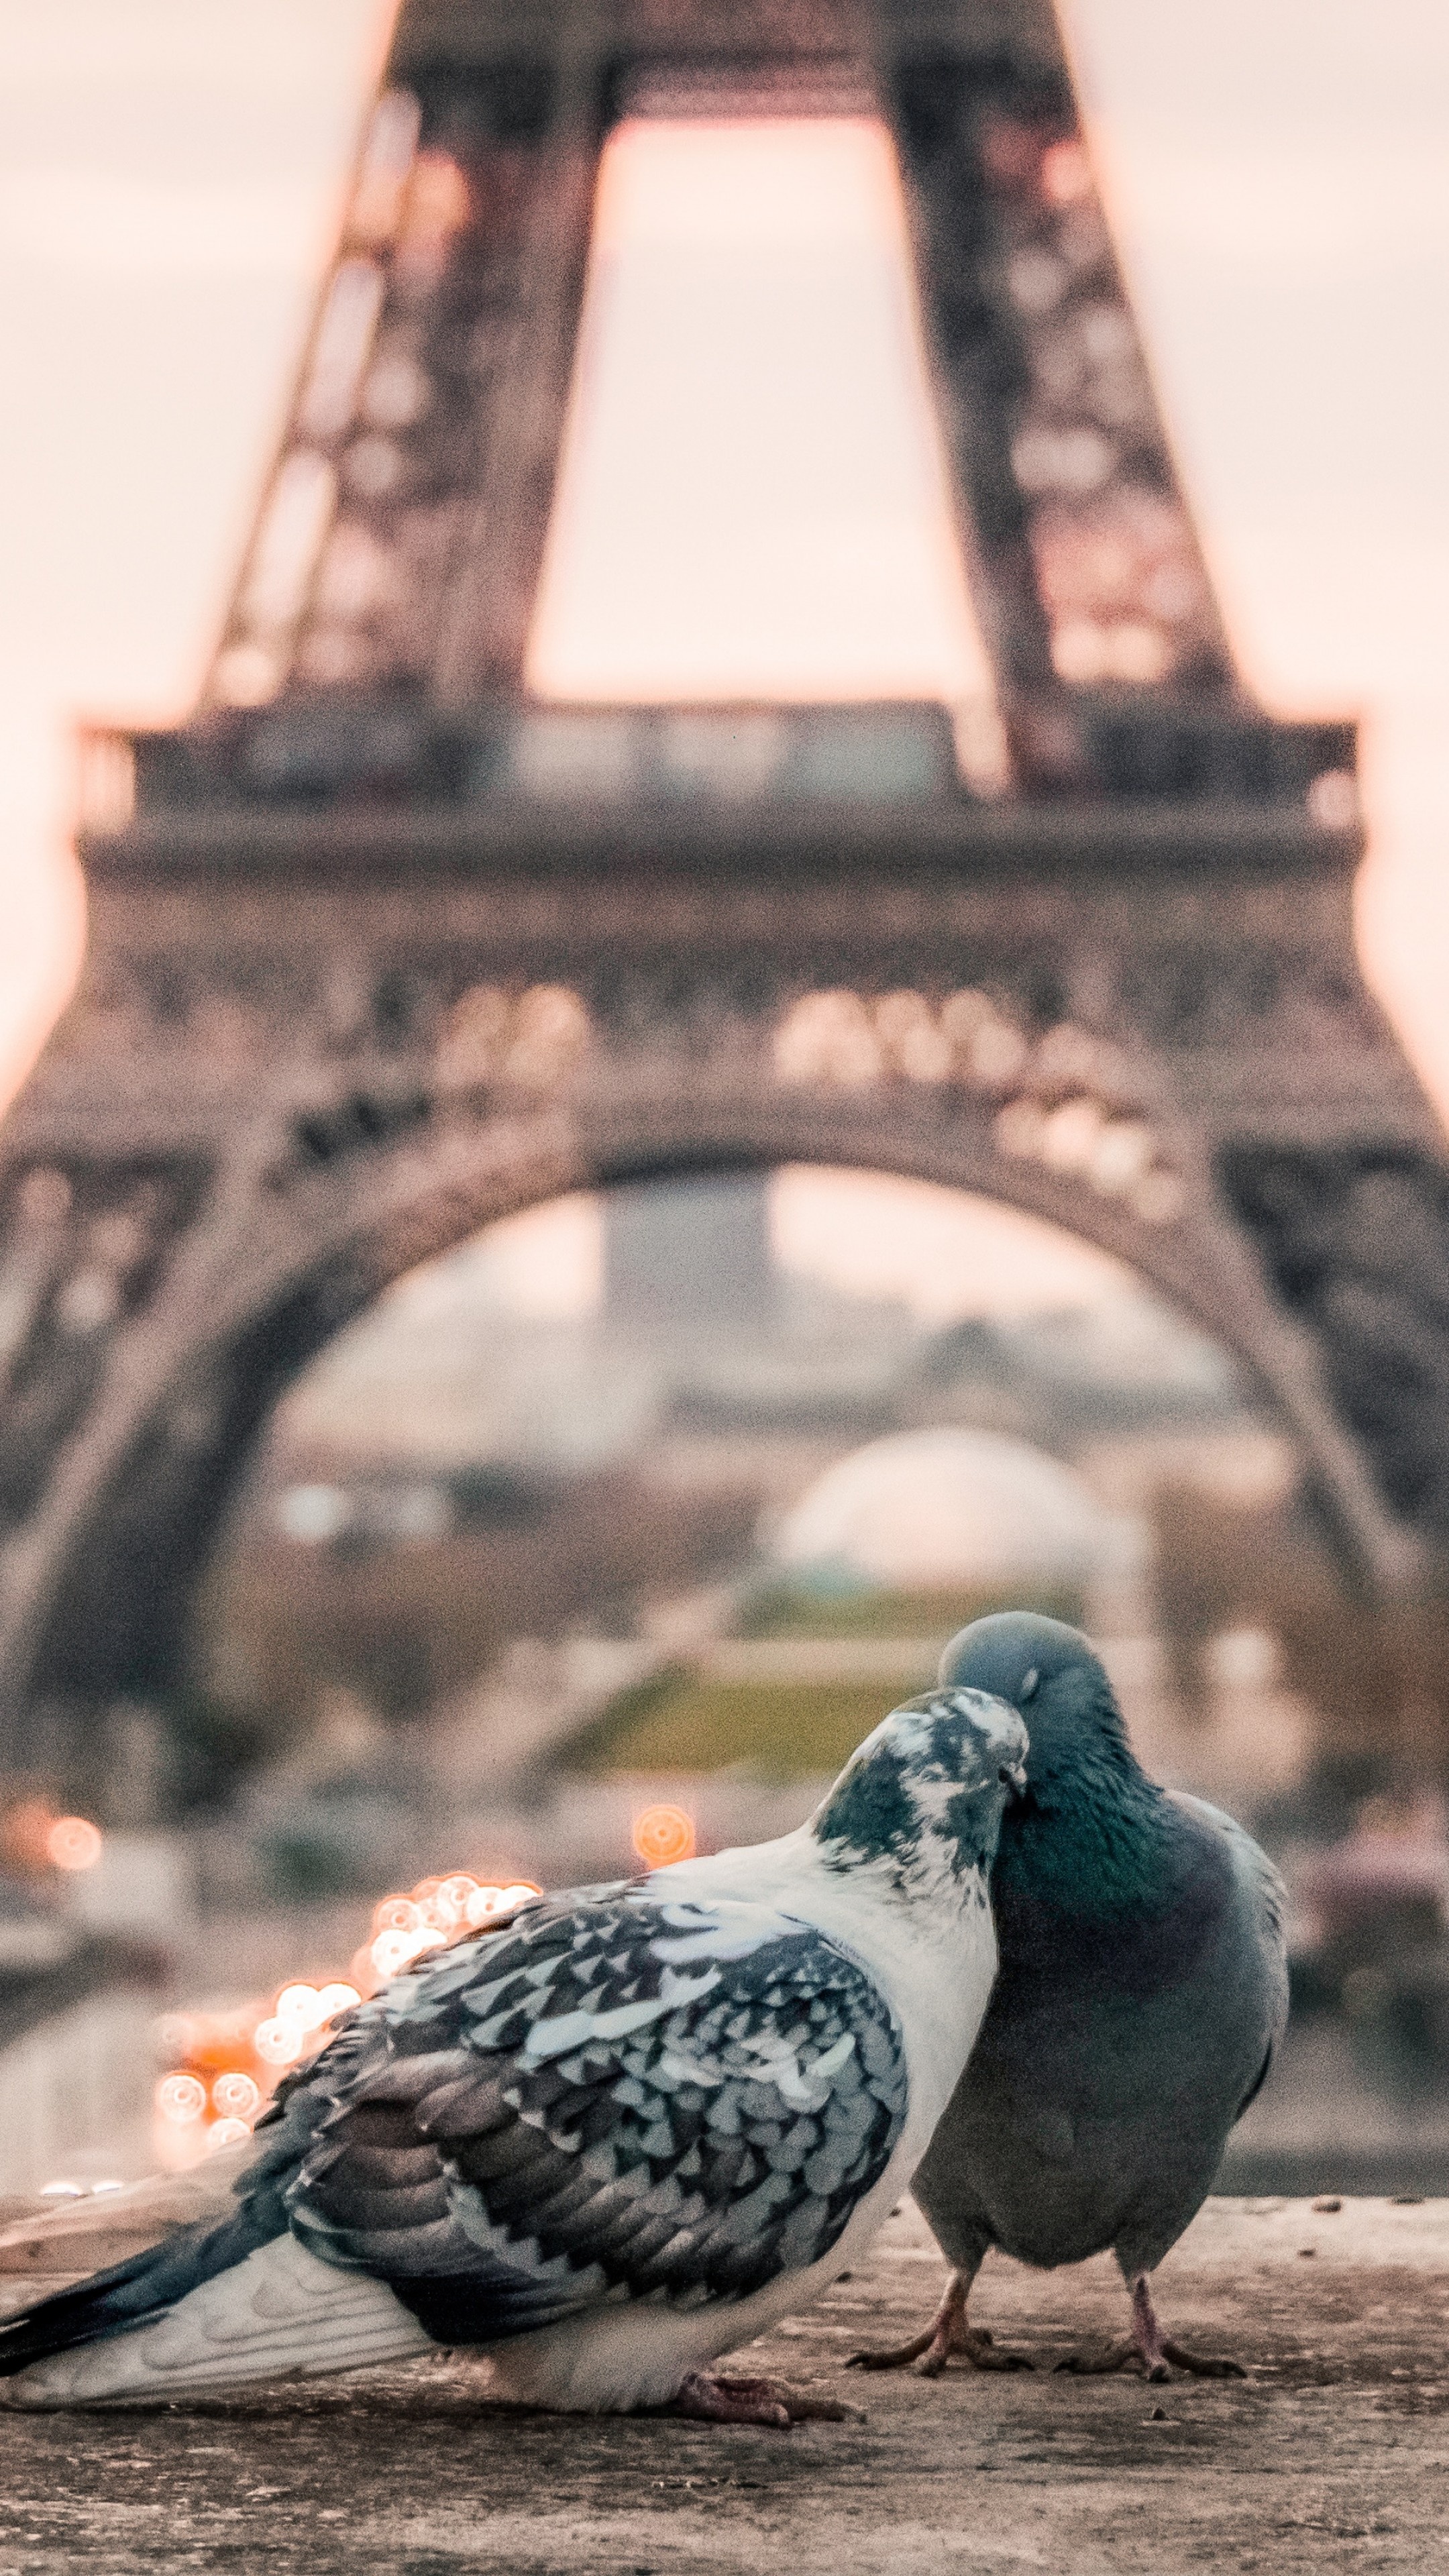 Pigeon: Doves, Medium-sized birds, usually measuring between 30 and 40 cm in length. 2160x3840 4K Background.